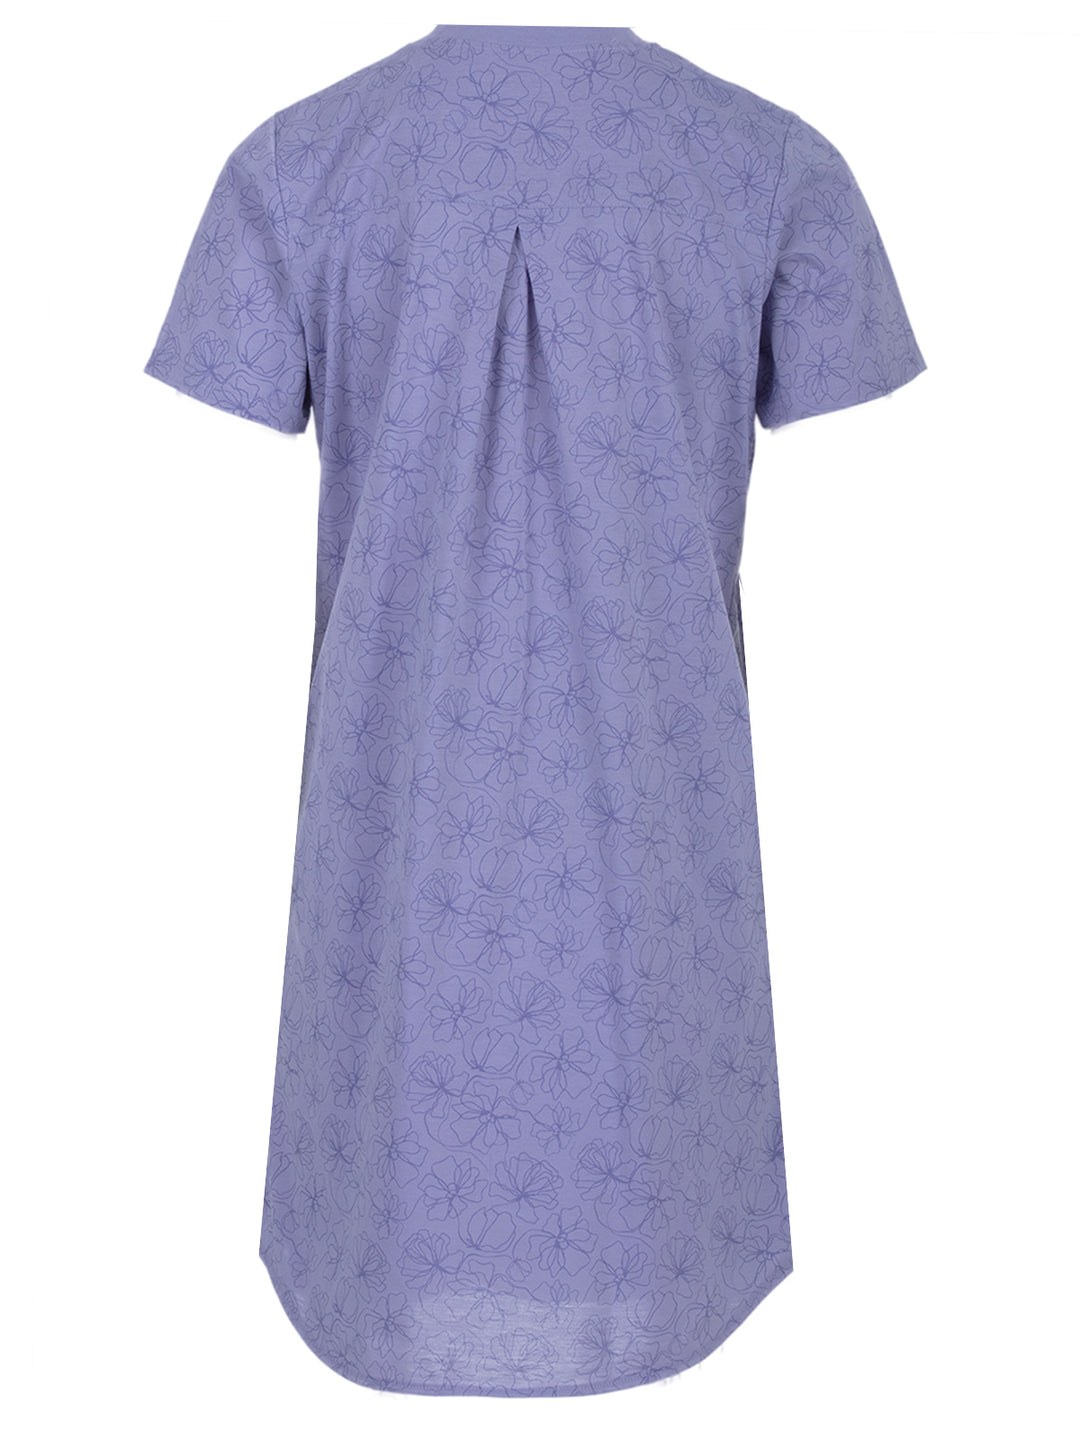 Nightgown Short Sleeve - Blossoms Collar Floral